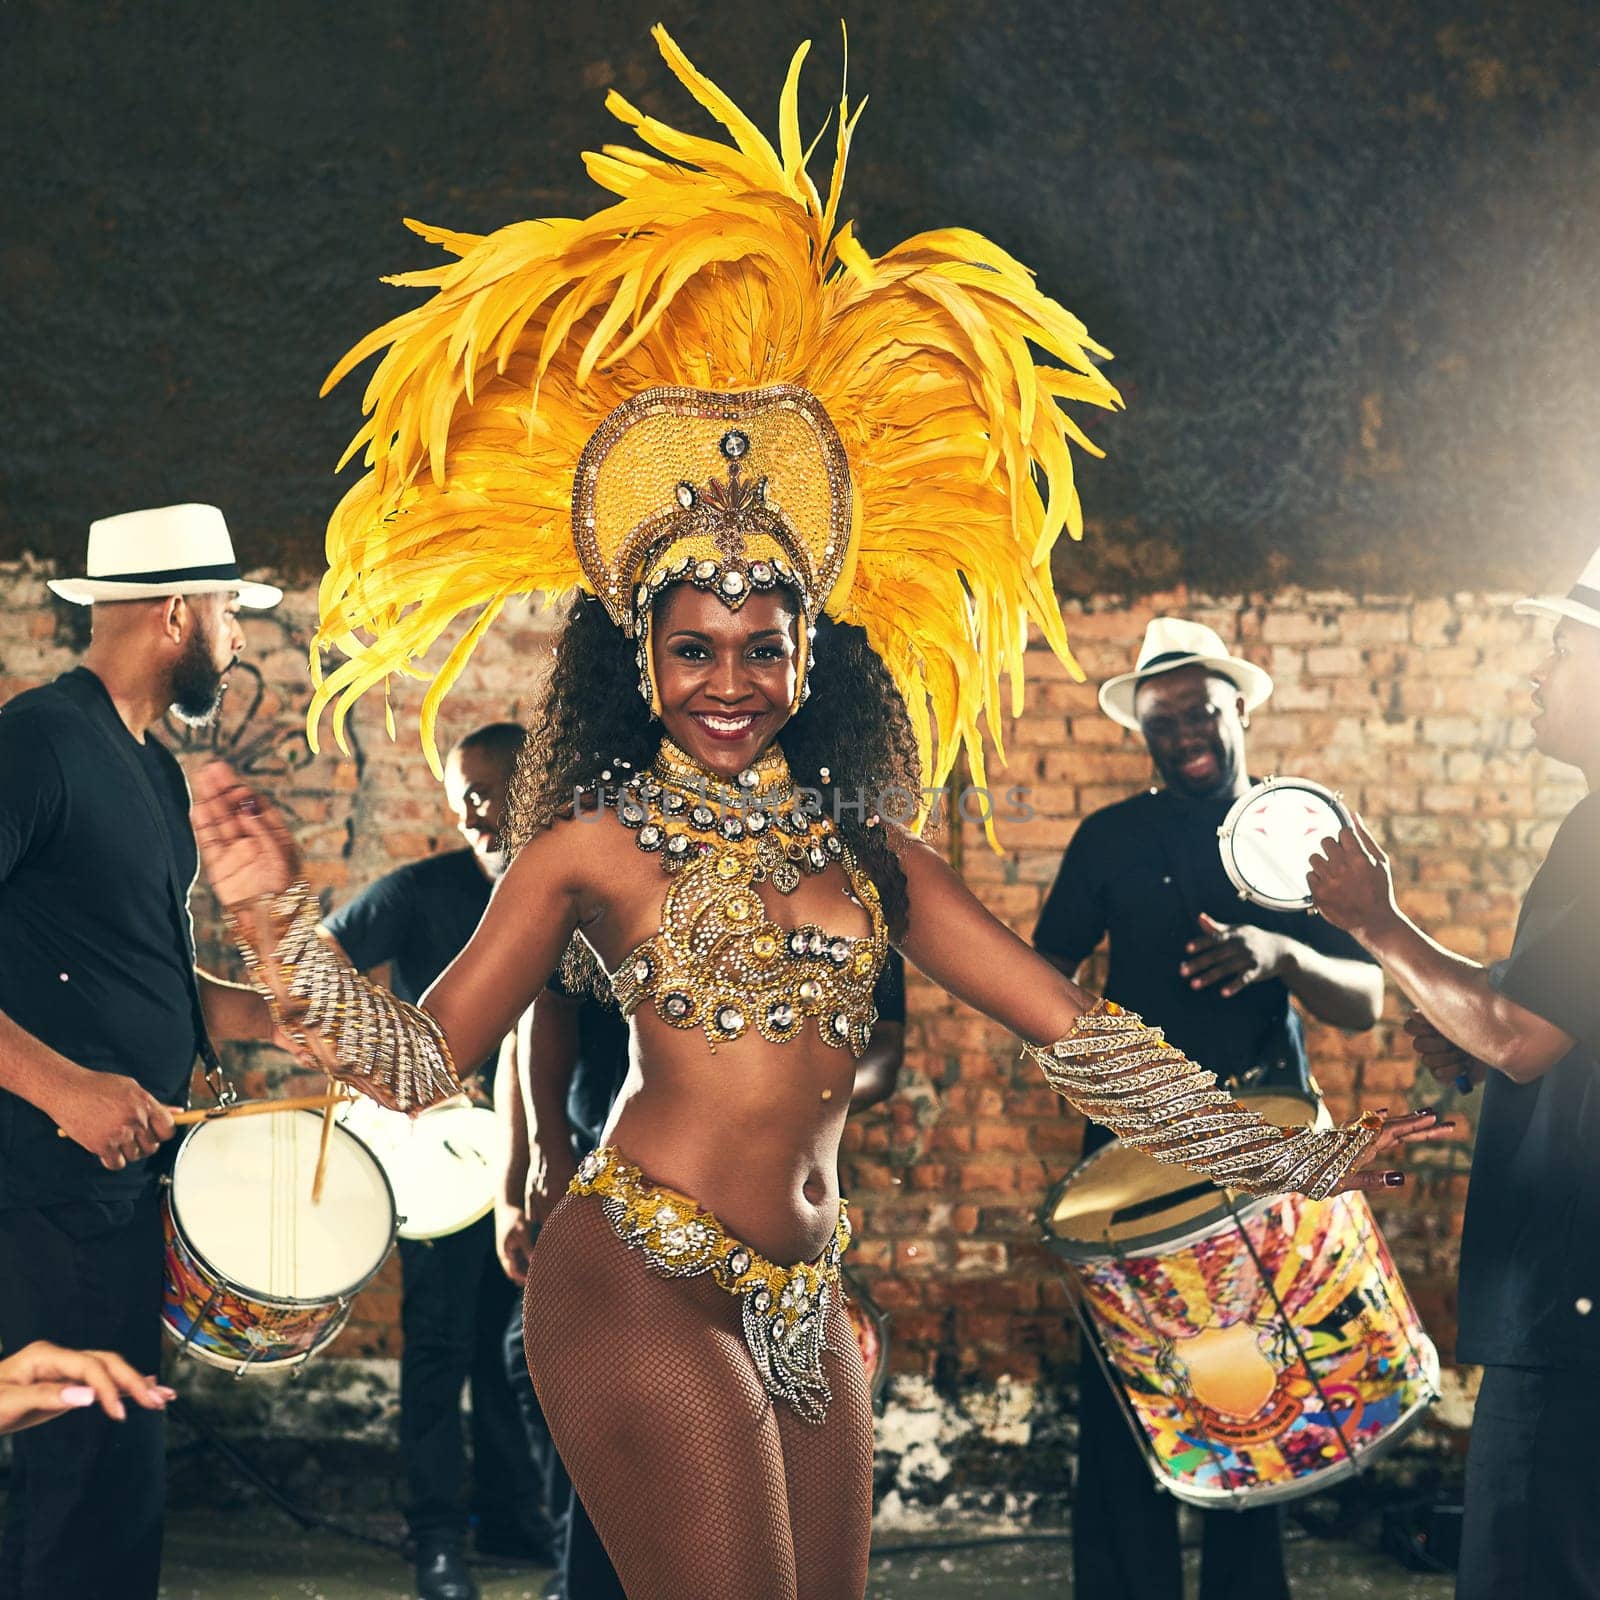 Samba, dance and black woman at Carnival to celebrate, night energy and holiday party in Rio de Janeiro, Brazil. Street band, music smile and portrait of a dancer at an outdoor festival dancing.